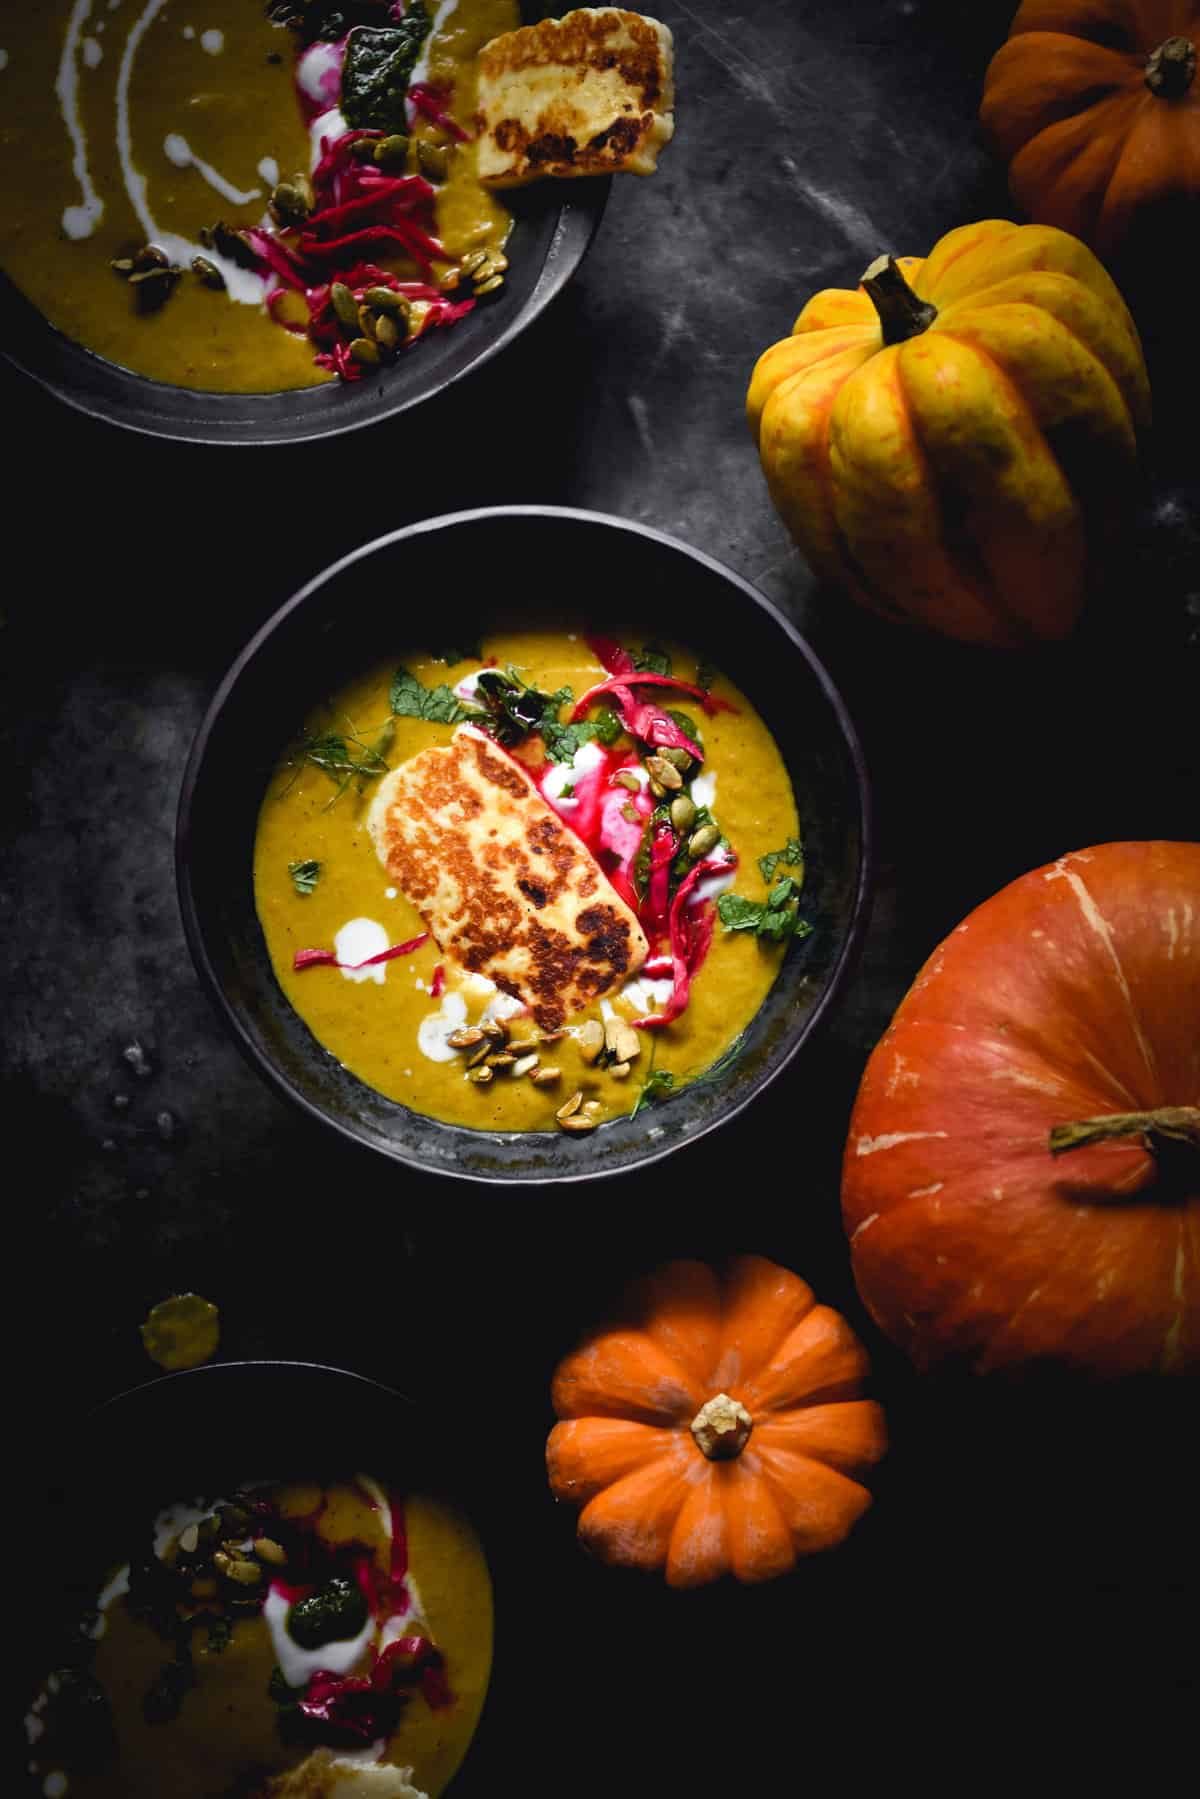 A moody aerial image of a dark ceramic bowl filled with Moroccan spiced pumpkin soup. The bowl is topped with haloumi, herbs, pepitas and pickled cabbage. The central bowl is surrounded by heirloom pumpkins.